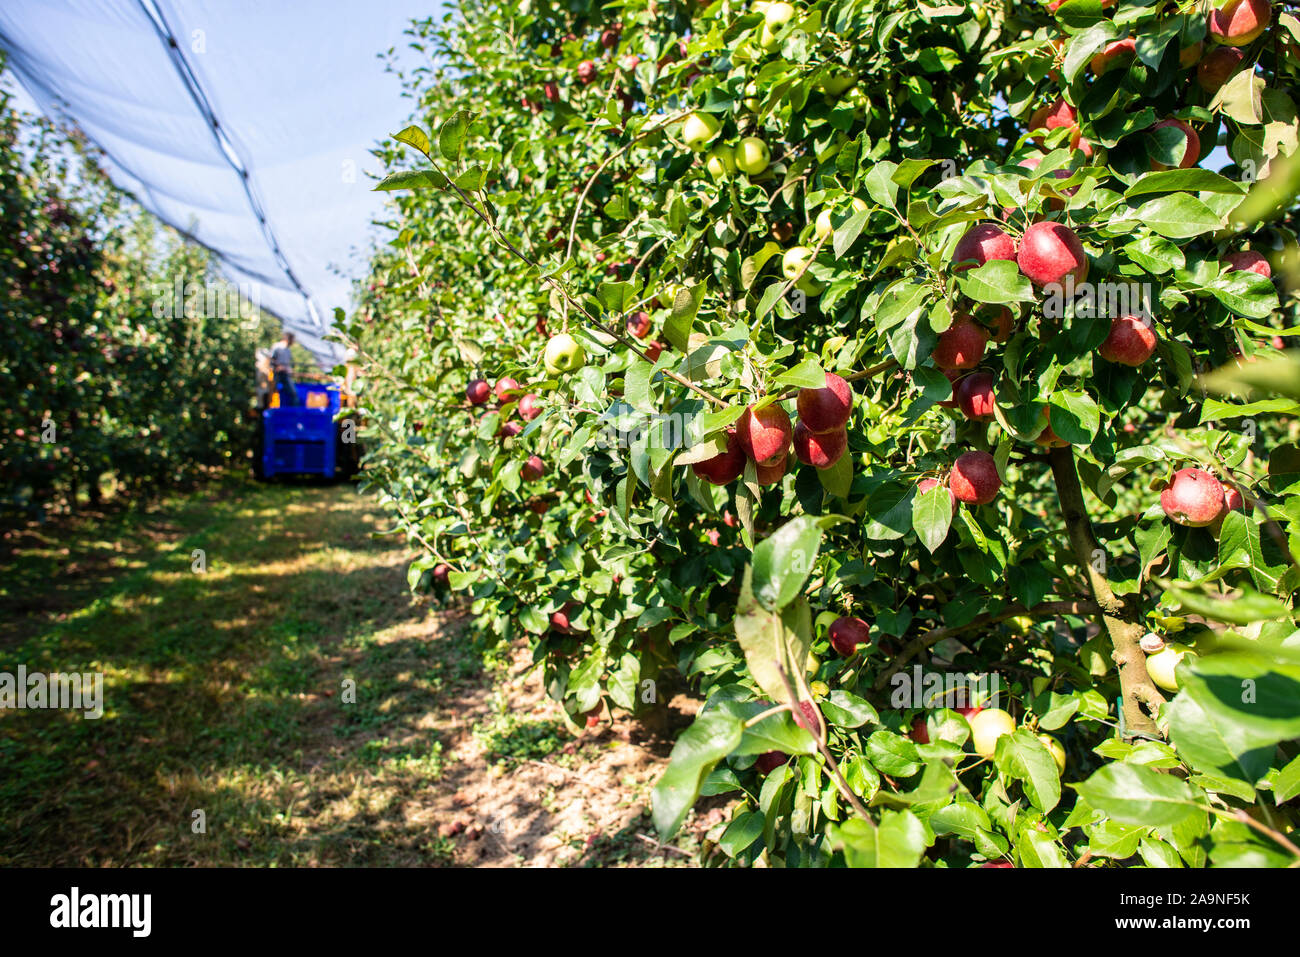 Harvest apples in big industrial apple orchard. Machine for picking apples. Concept for growing and harvesting apples through automatization. Sunny da Stock Photo